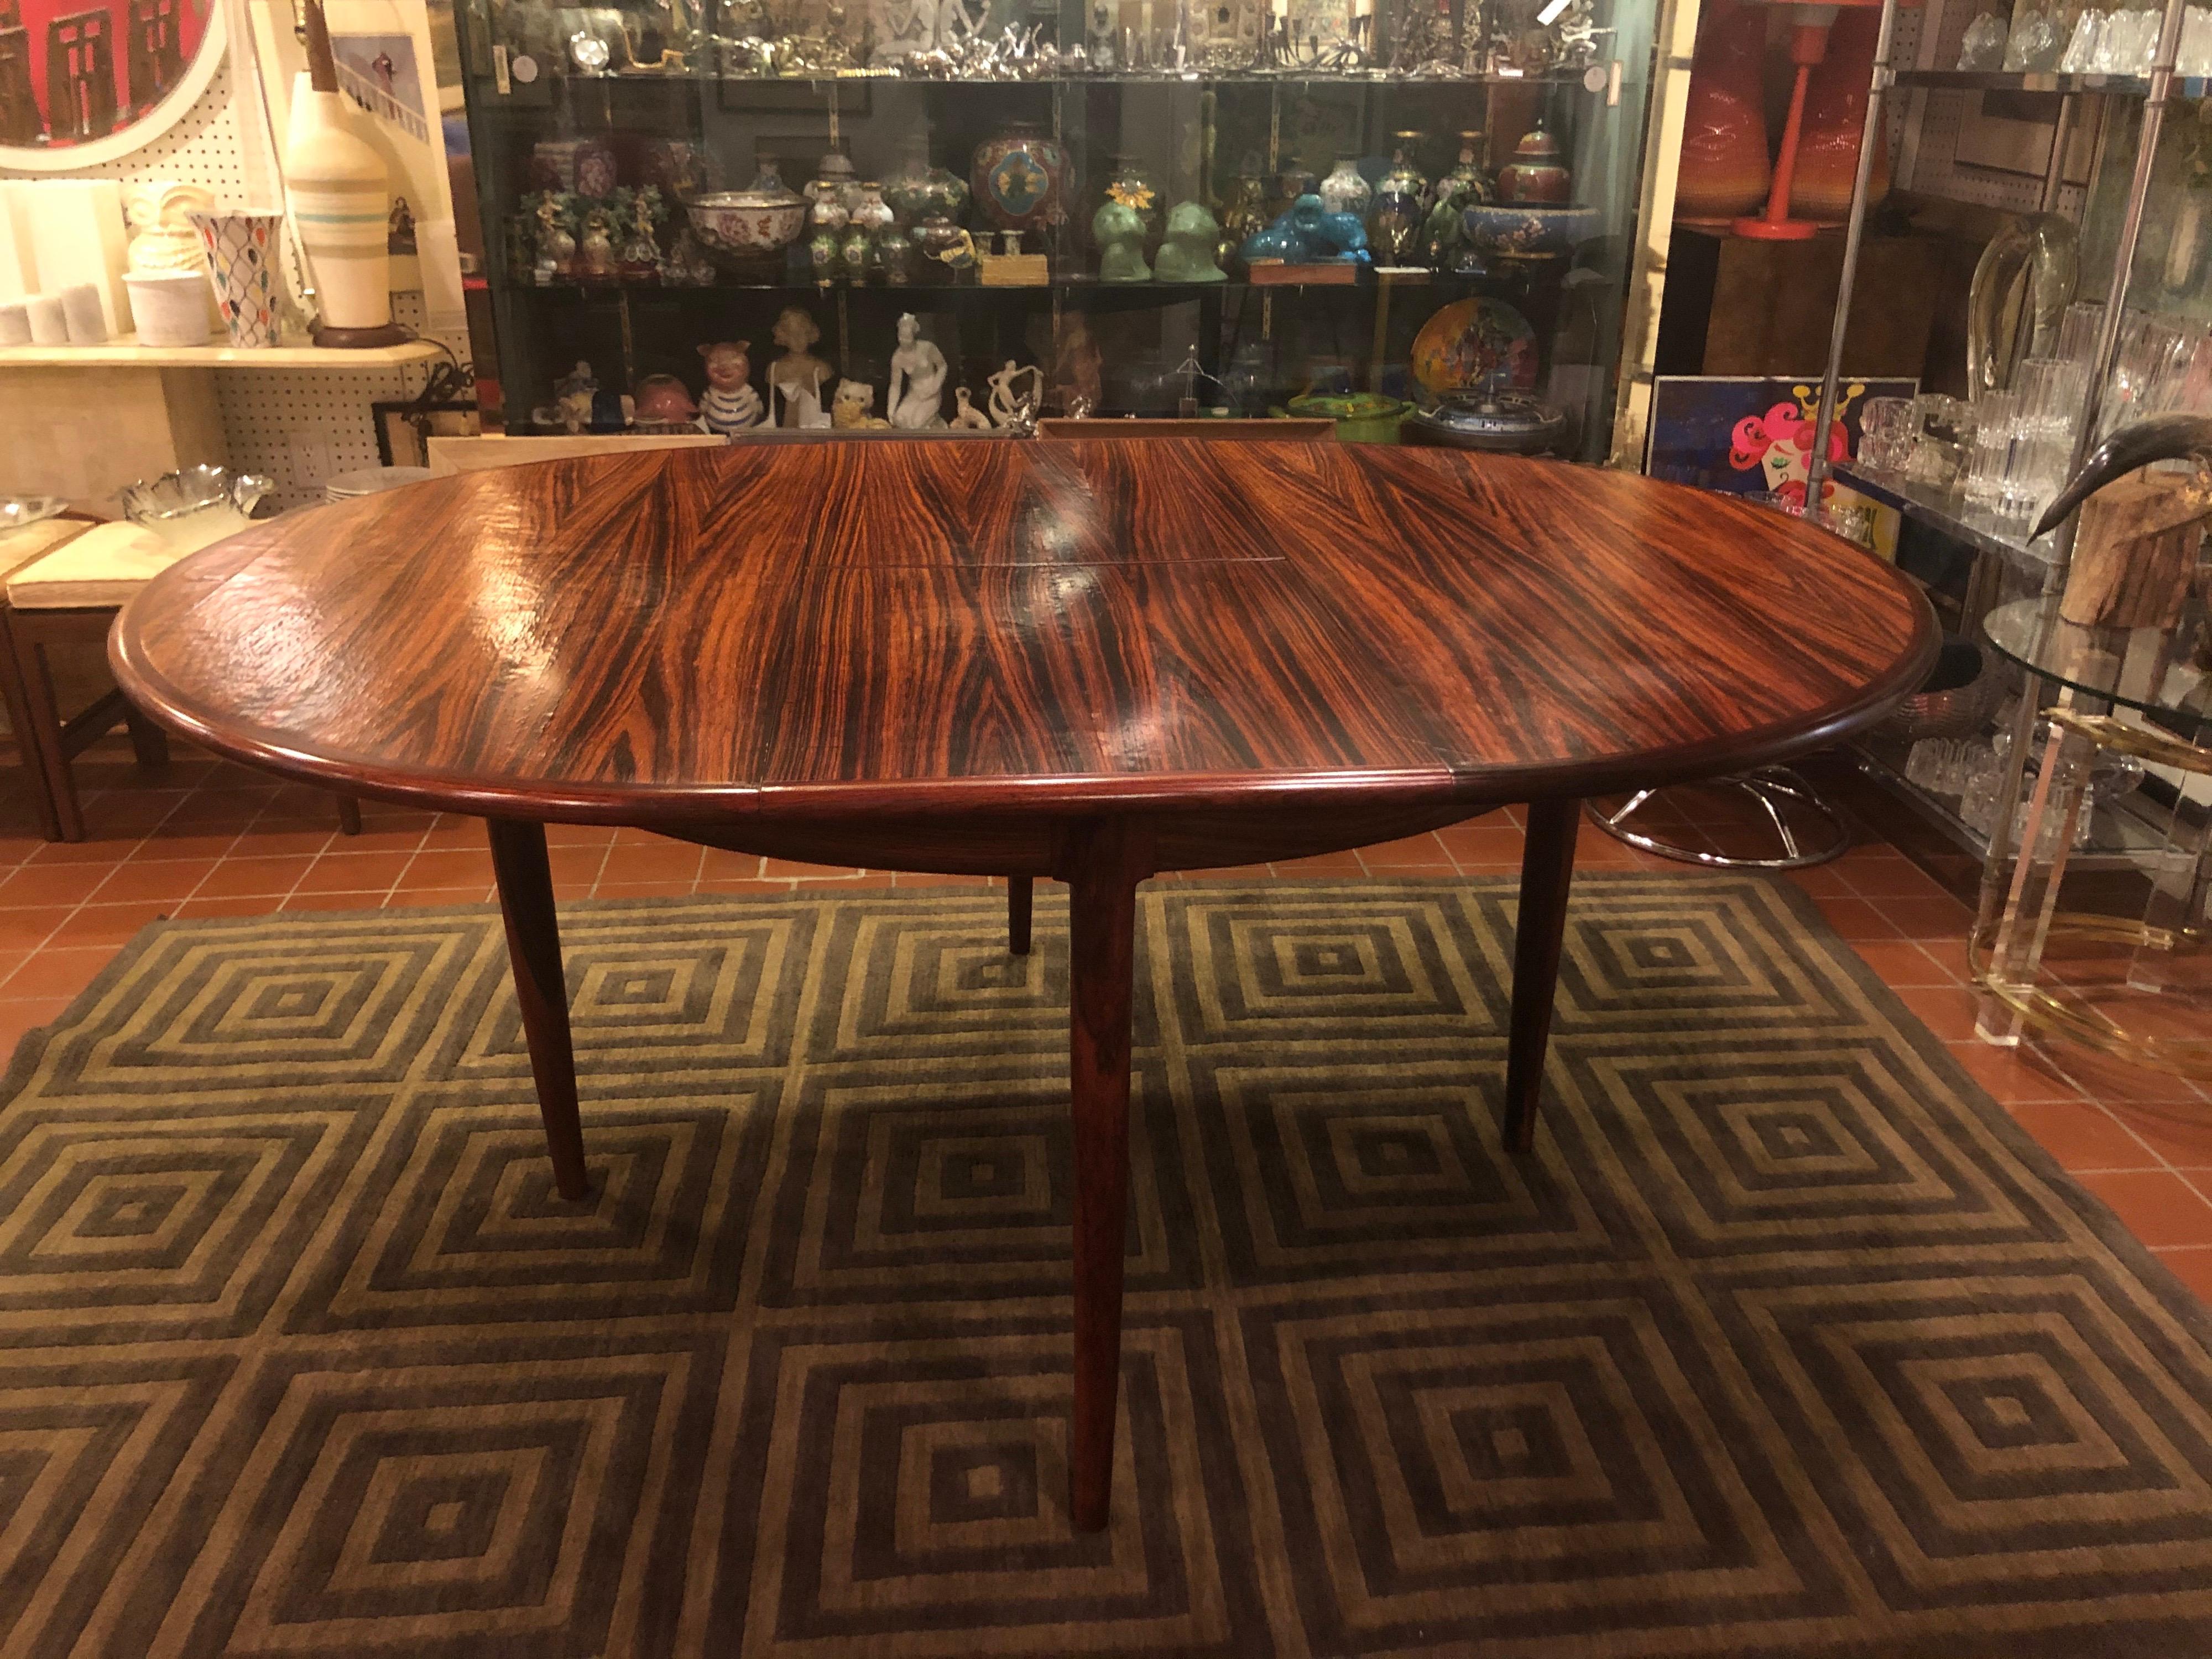 Mid Century adjustable rosewood dining table. Inner leaf folds down into the table to make it round if you need it smaller. Set of 6 teak dining chairs are also available in a separate listing. Labeled Danish Control furniture makers. With the leaf